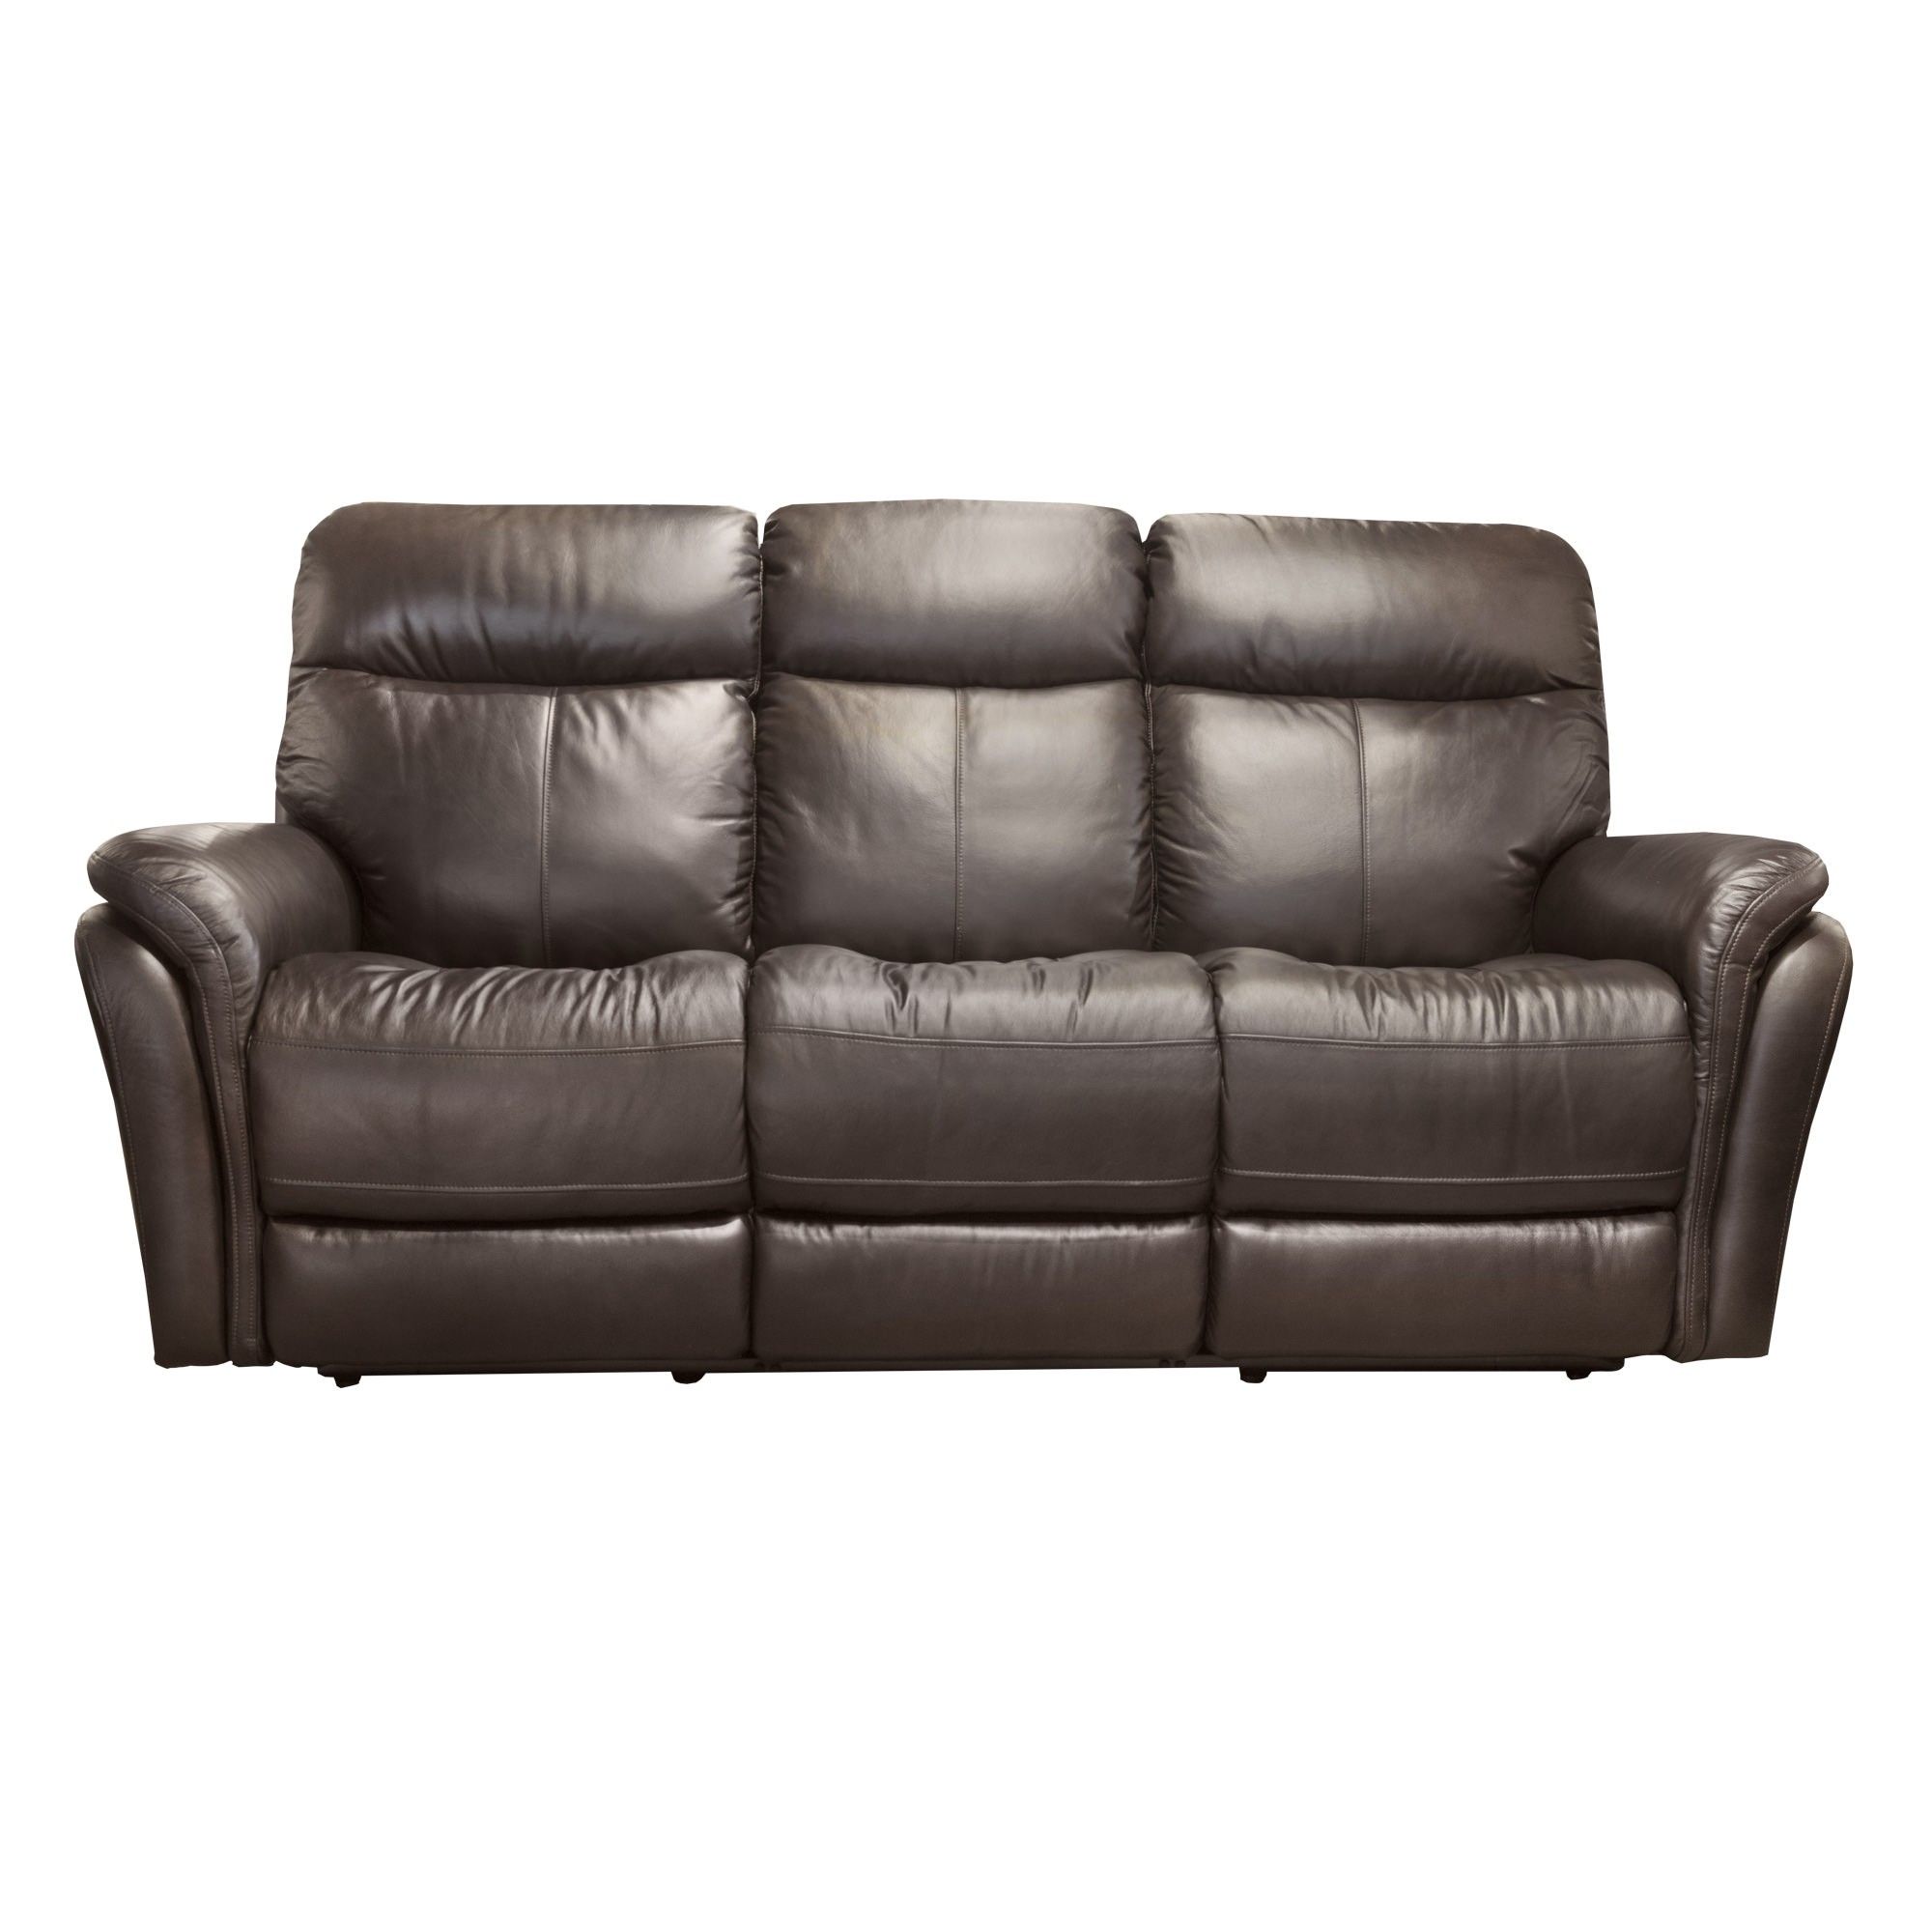 Zoey Brown Power Reclining Sofa With Power Headrest In Expedition Brown Power Reclining Sofas (View 3 of 15)